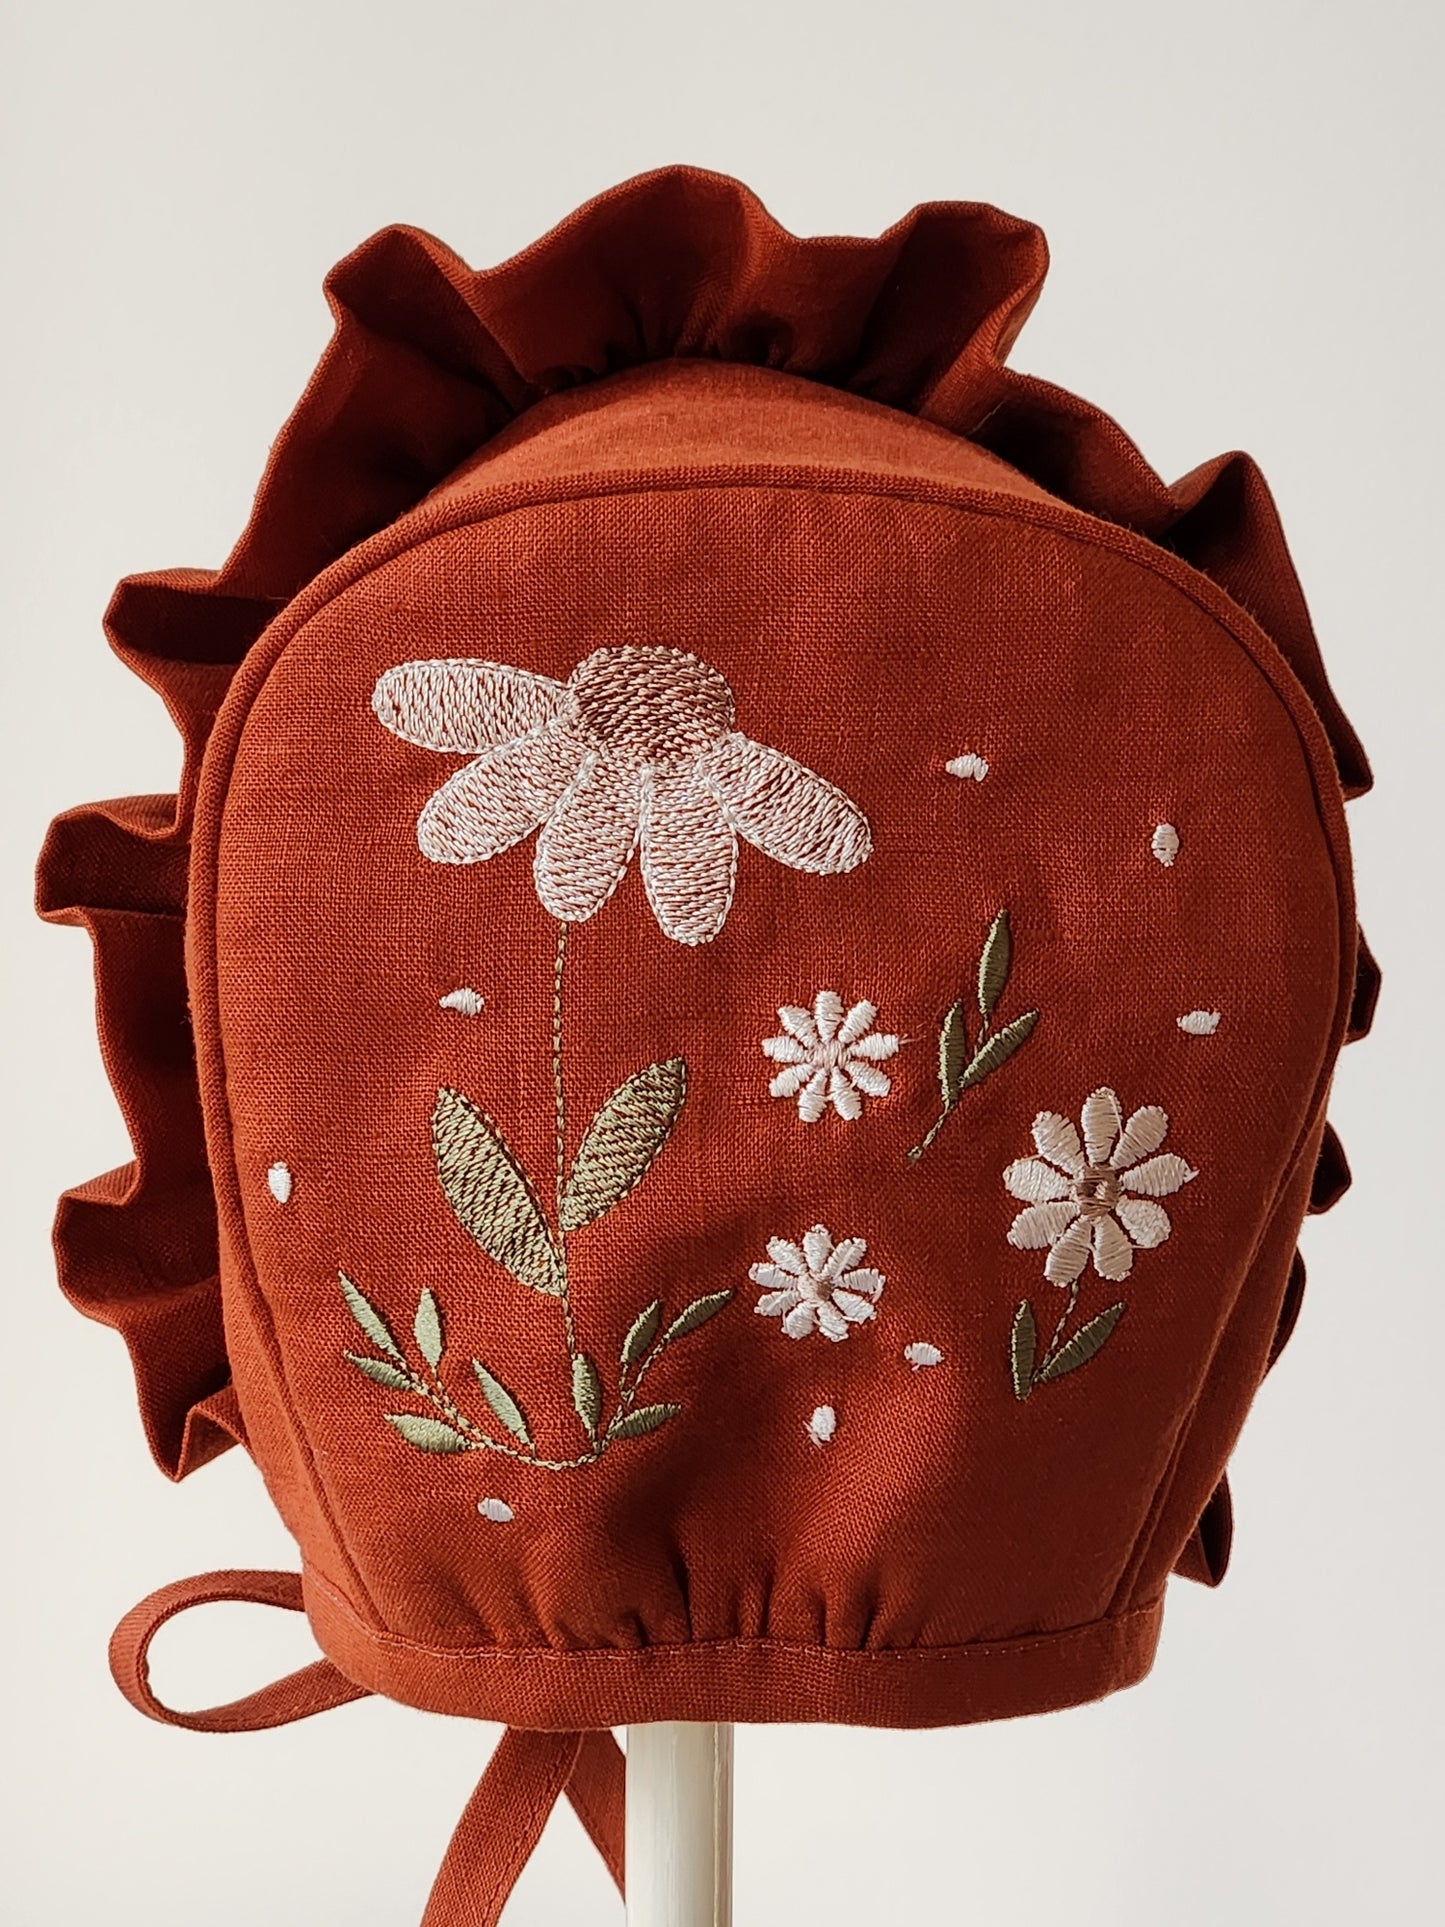 Exclusive Linen Bonnet, Tan with embroidered Daisy Posy